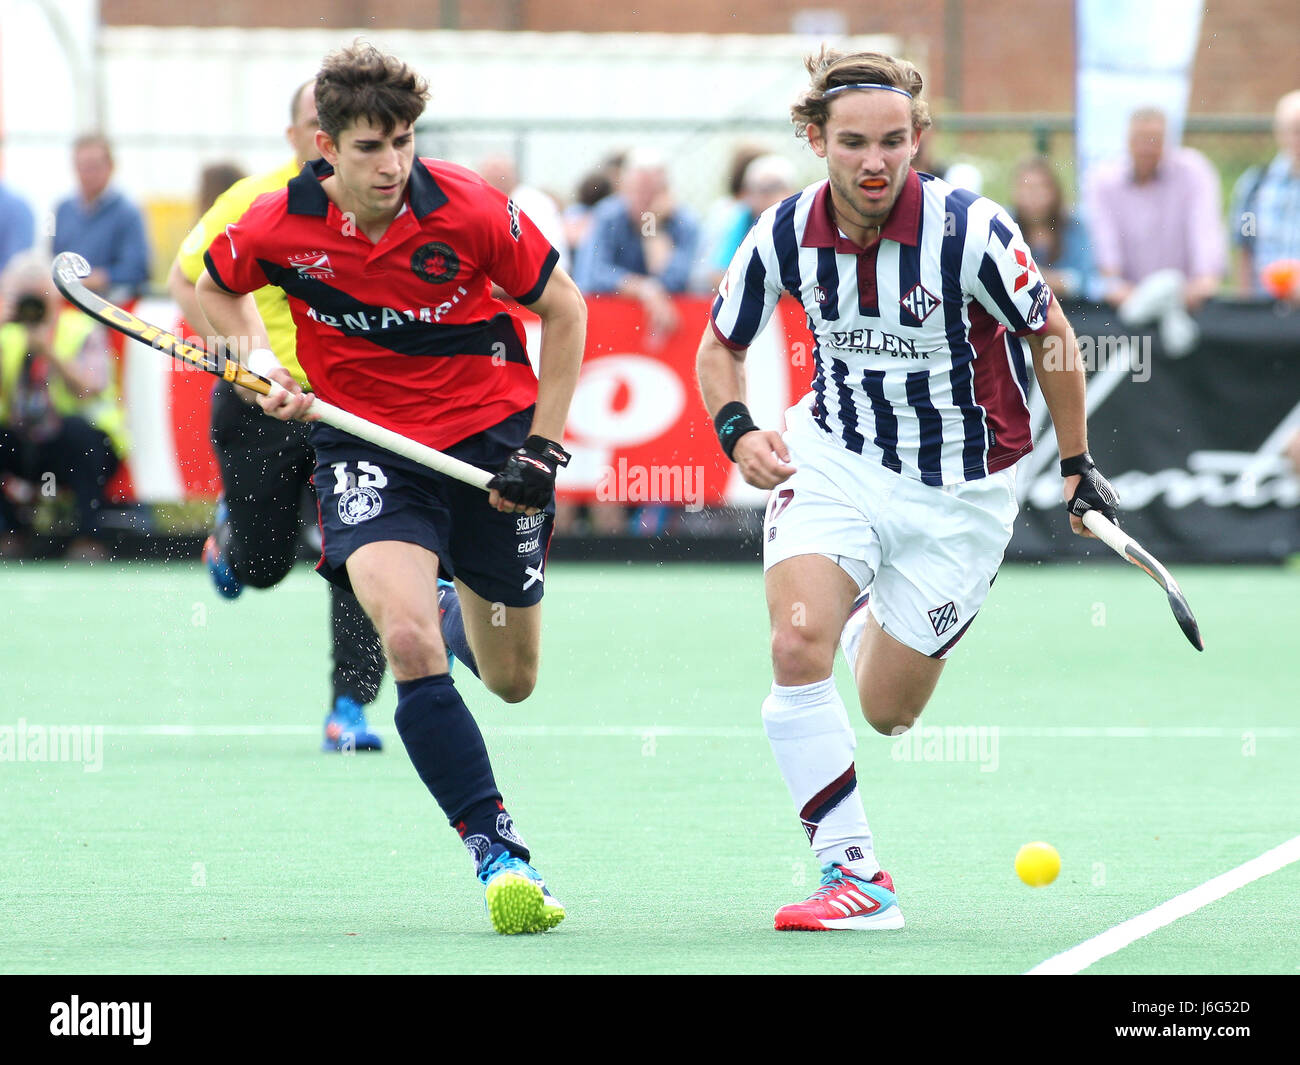 Leuven, Belgium. 21st May, 2017. Hockey final Play-off men Dragons Vs. Herakles, Van Stratum Anthony of Herakles and Rombouts Mathieu of Dragons in game actions Credit: Leo Cavallo/Alamy Live News Stock Photo